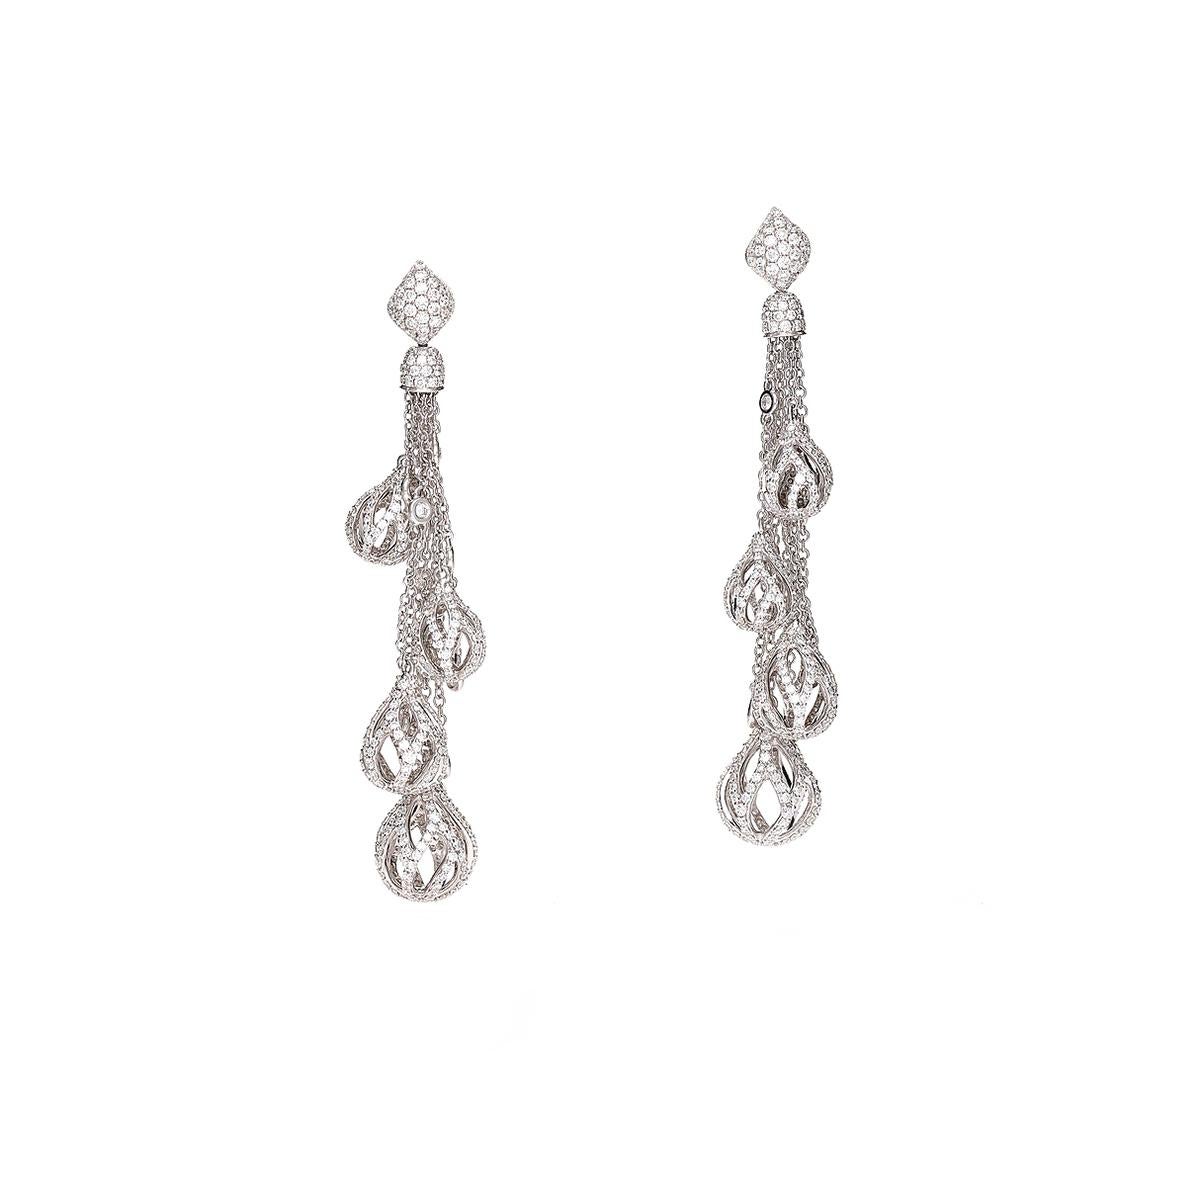 Earrings in 18kt white gold set with 1020 diamonds 4.93 cts